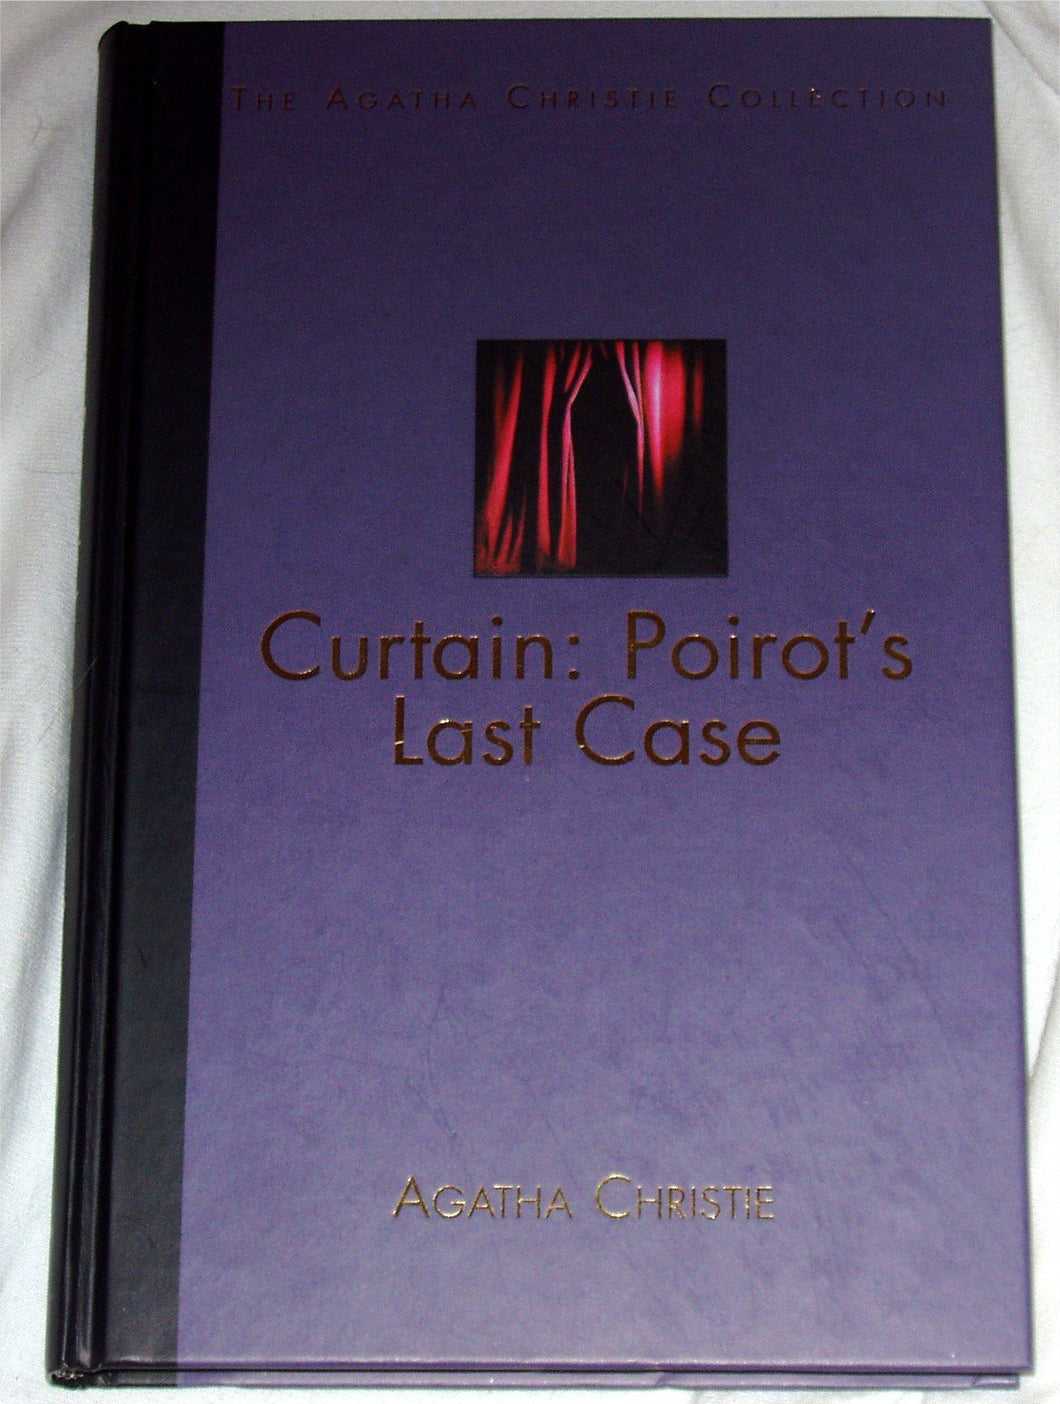 Curtain: Poirot's Last Case (The Agatha Christie Collection)